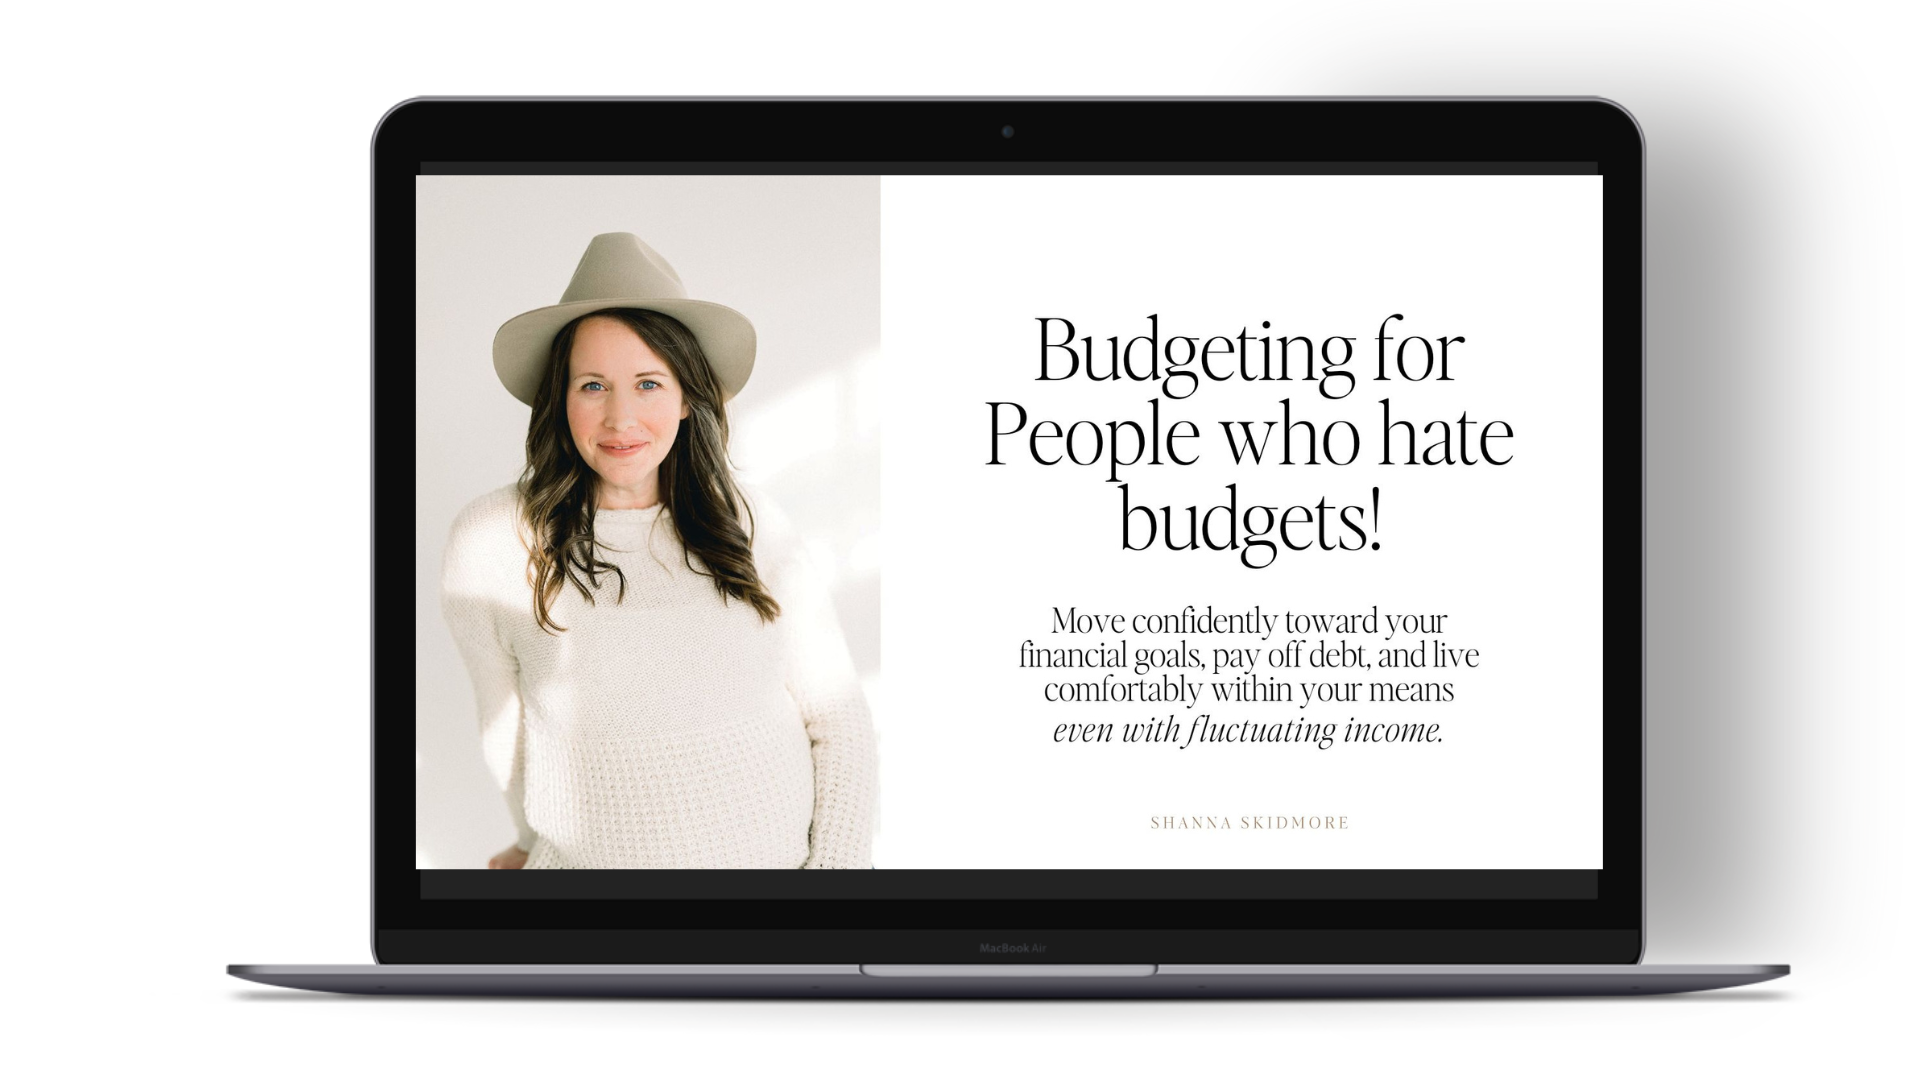 Photo of Shanna Skidmore with caption "Budgeting for People who hate budgets"